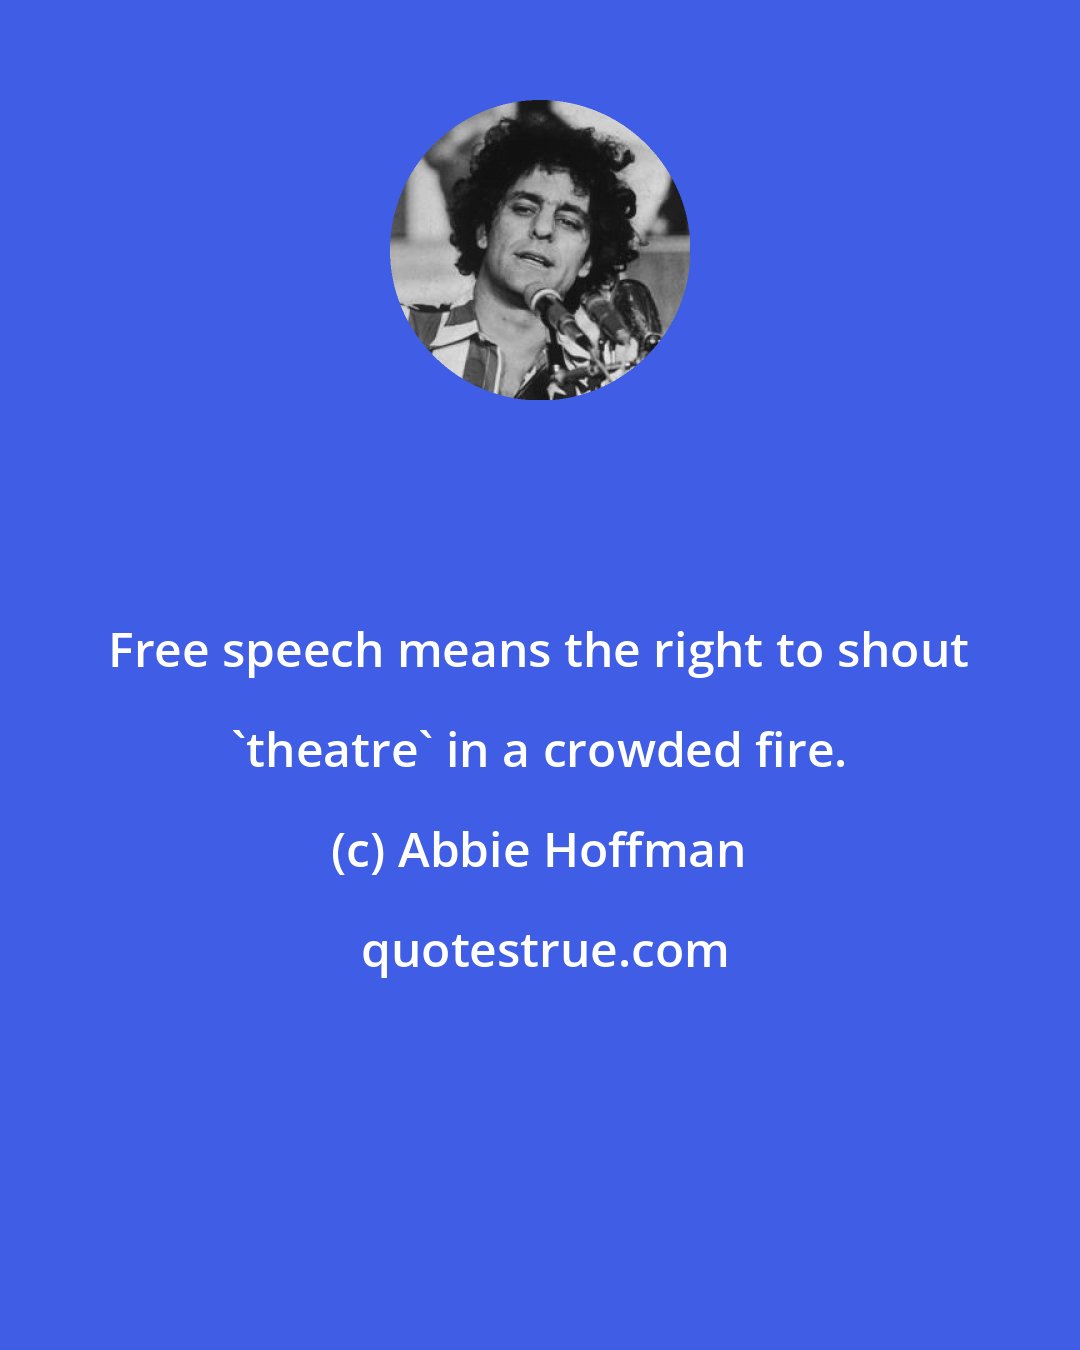 Abbie Hoffman: Free speech means the right to shout 'theatre' in a crowded fire.